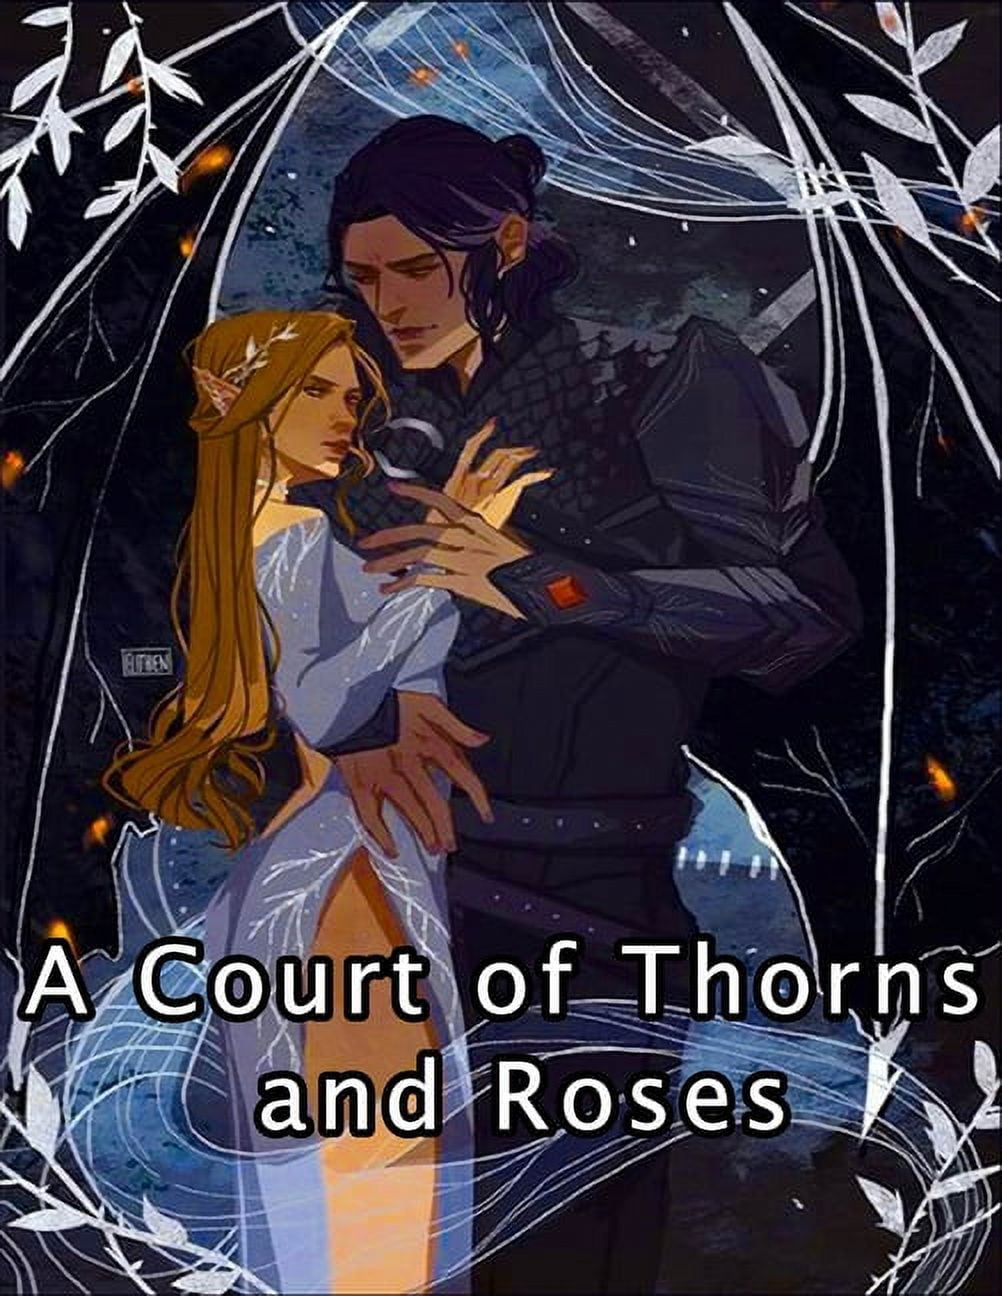 A Court of Thorns and Roses coloring book : coloring book for adults  (Paperback)